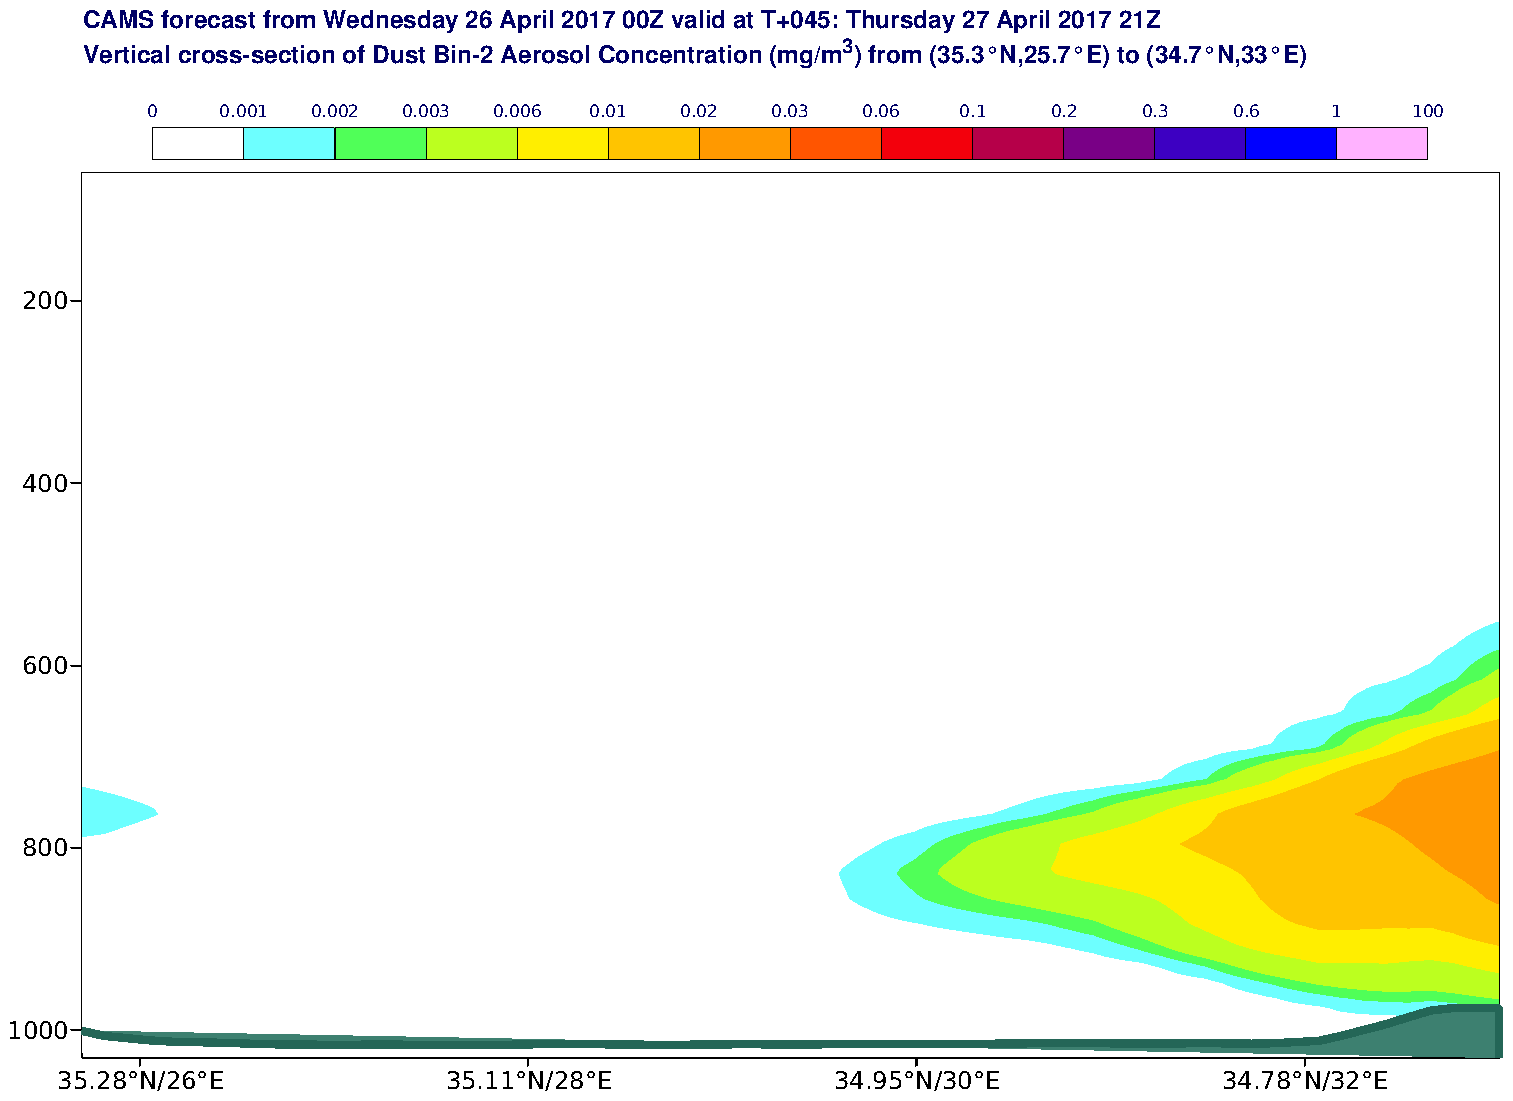 Vertical cross-section of Dust Bin-2 Aerosol Concentration (mg/m3) valid at T45 - 2017-04-27 21:00